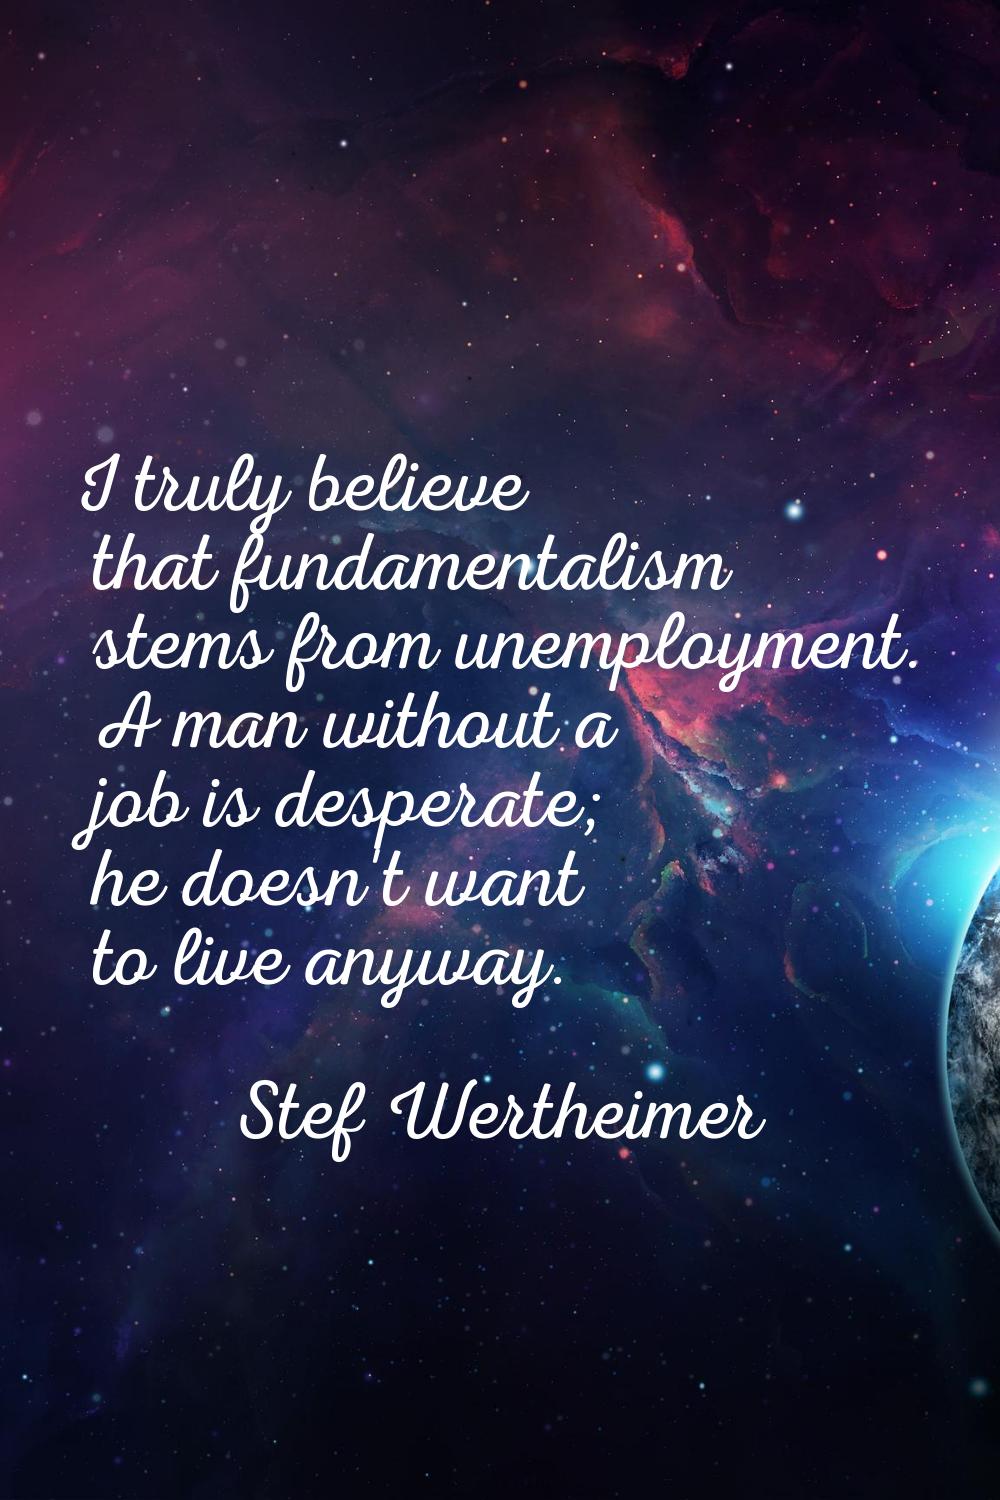 I truly believe that fundamentalism stems from unemployment. A man without a job is desperate; he d